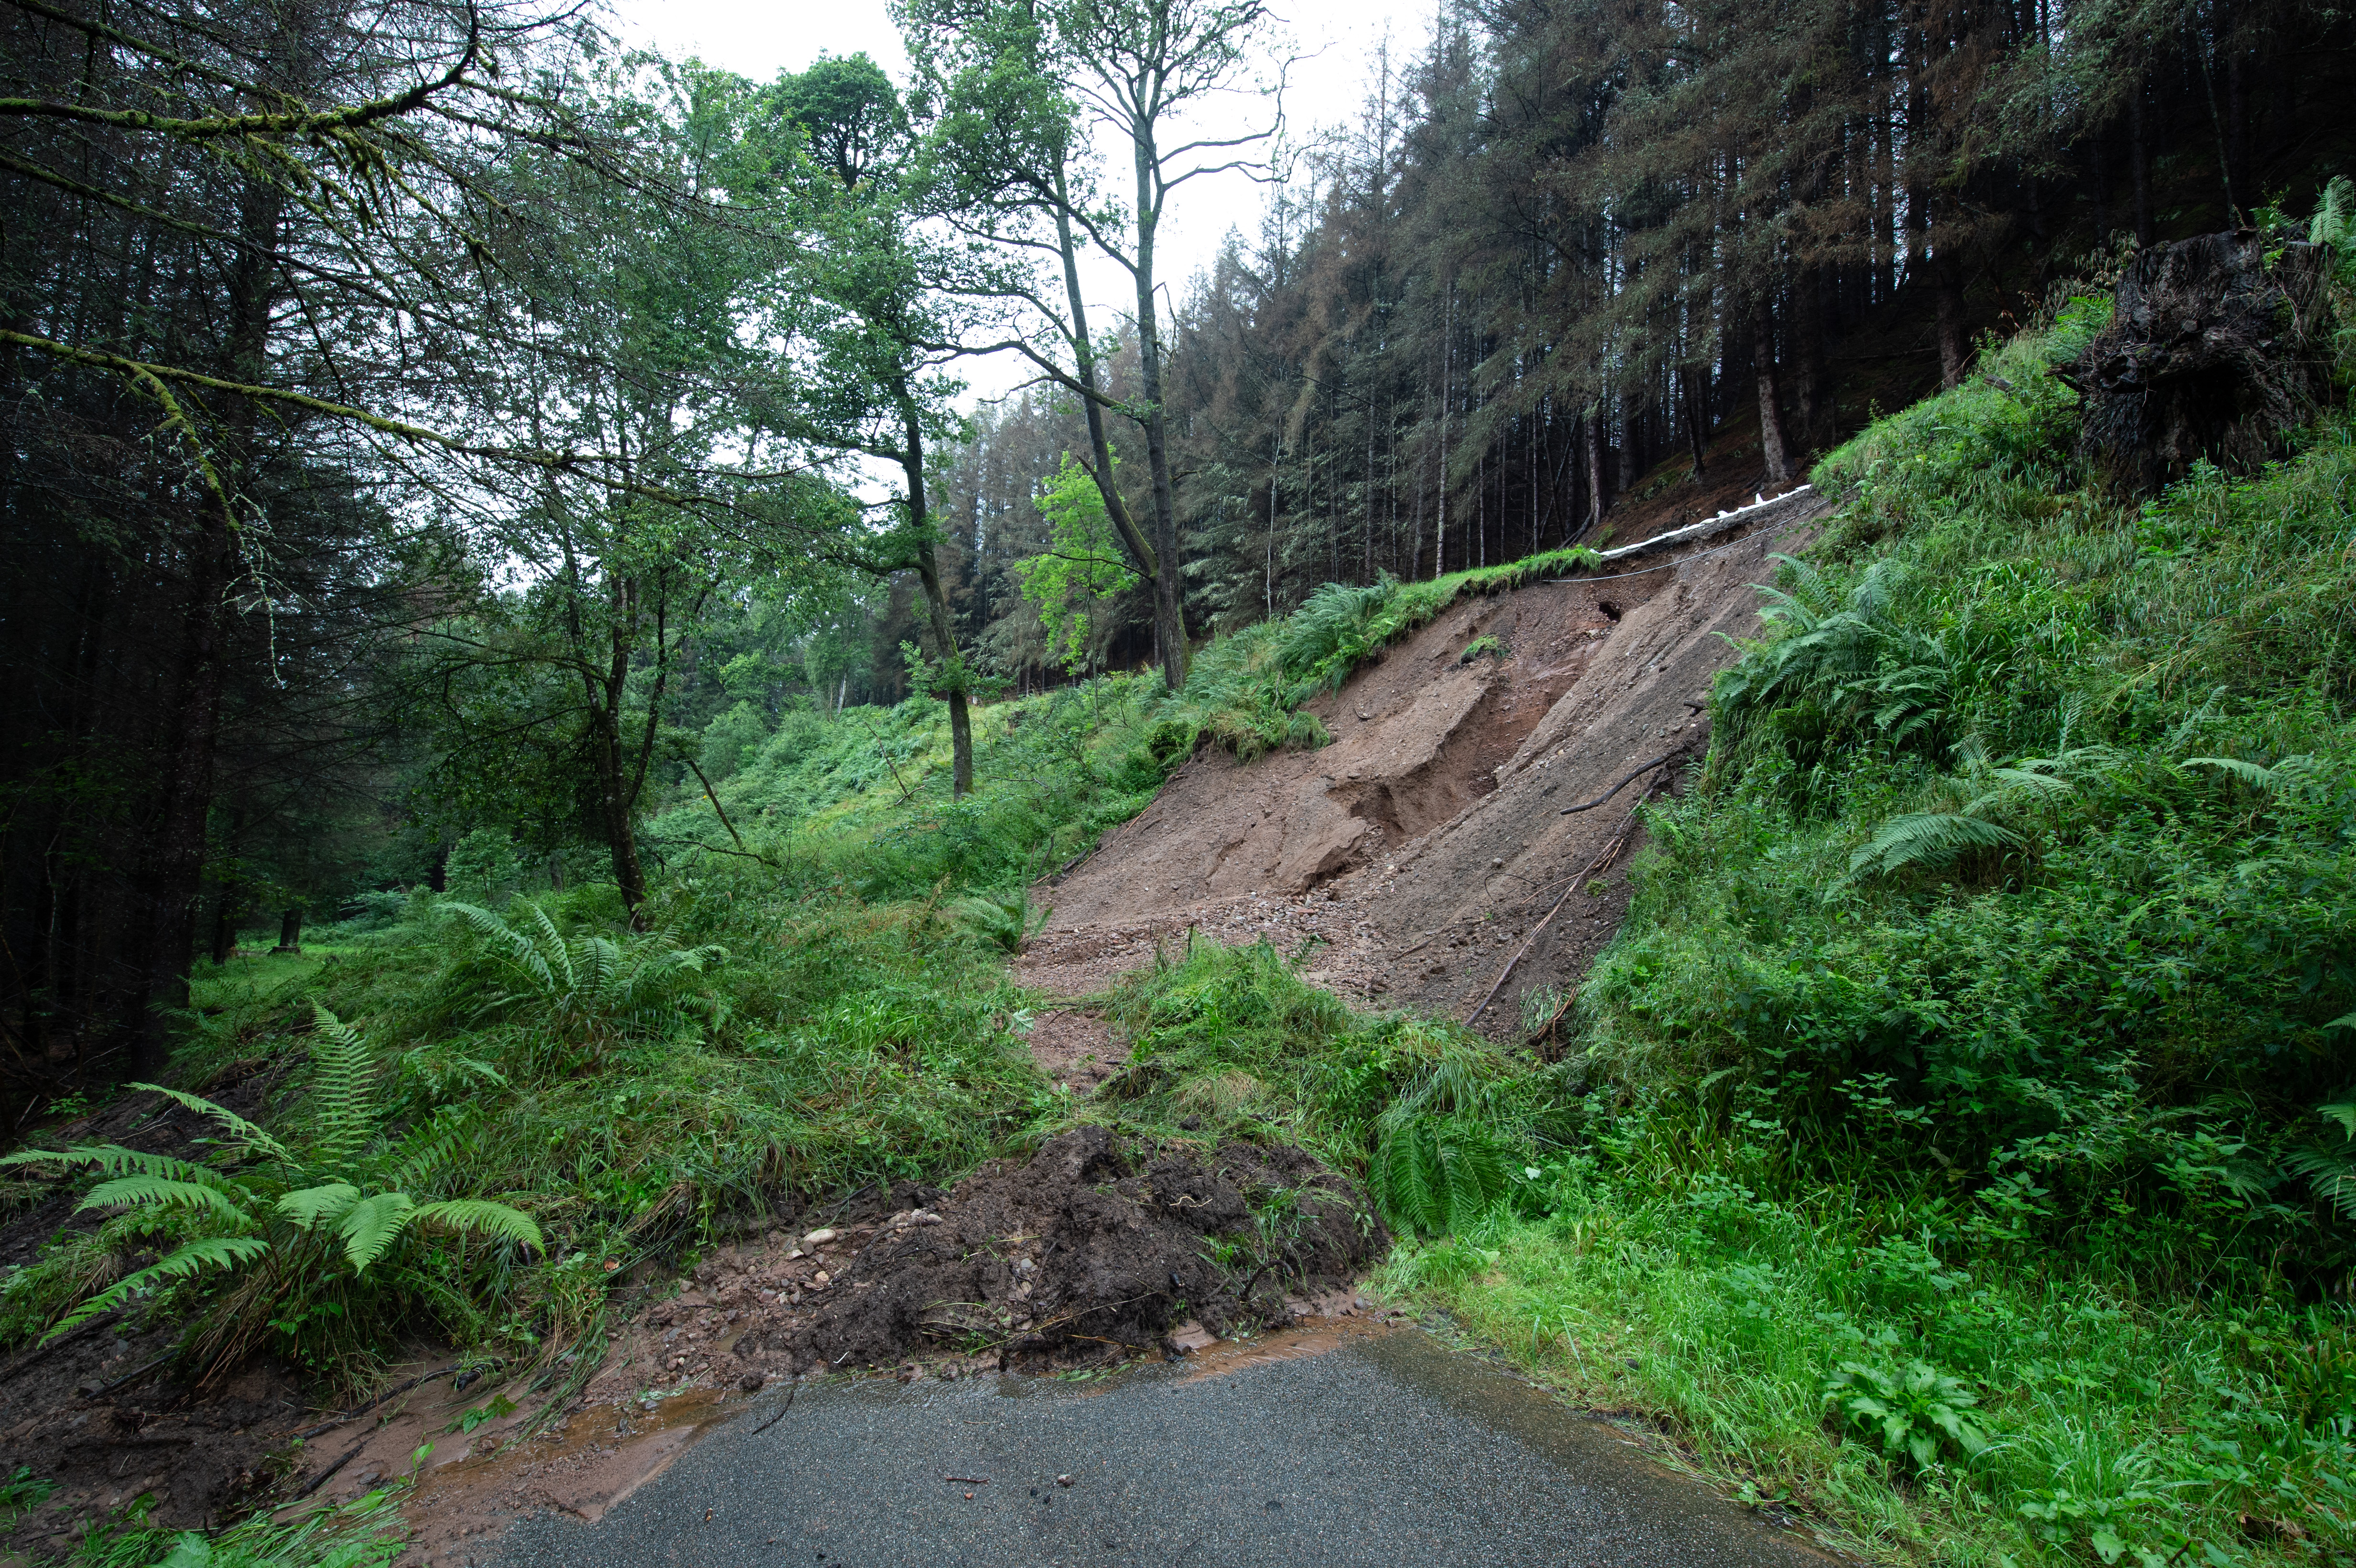 A landslip has caused the Cairnty Road near Mulben to be closed.